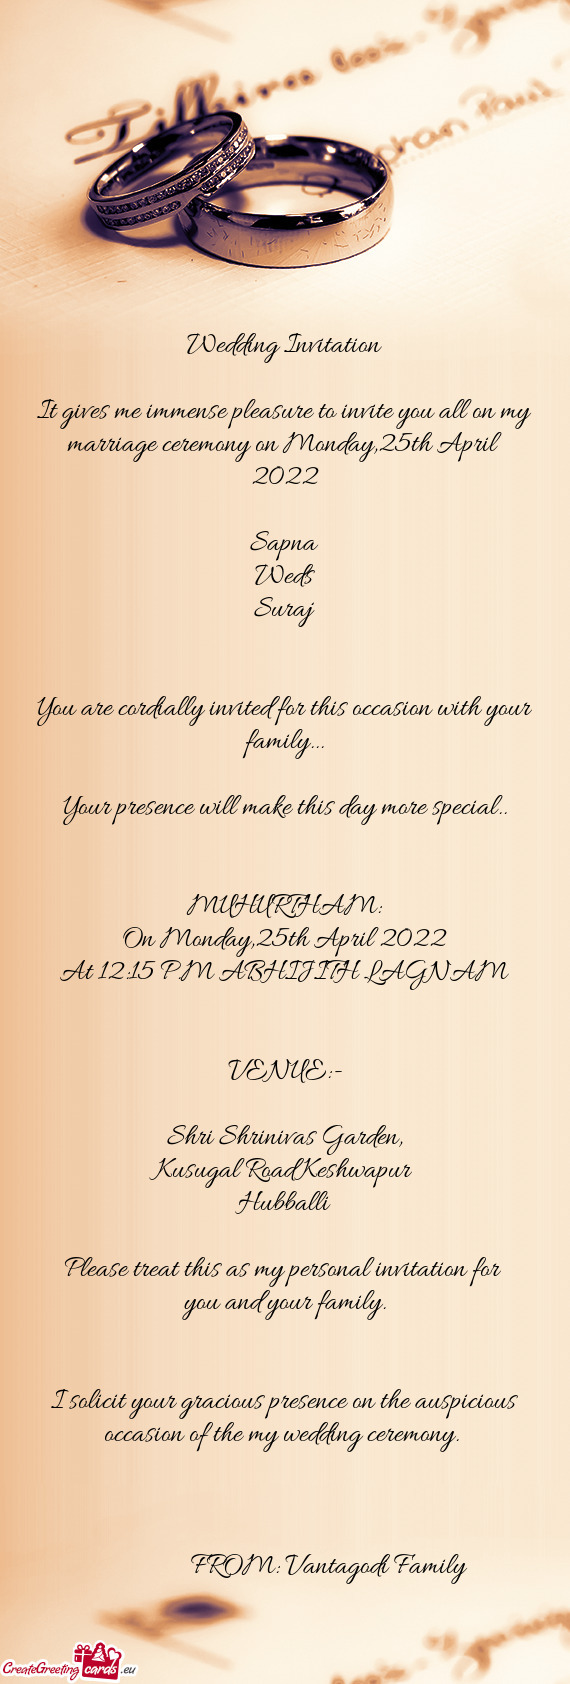 It gives me immense pleasure to invite you all on my marriage ceremony on Monday,25th April 2022